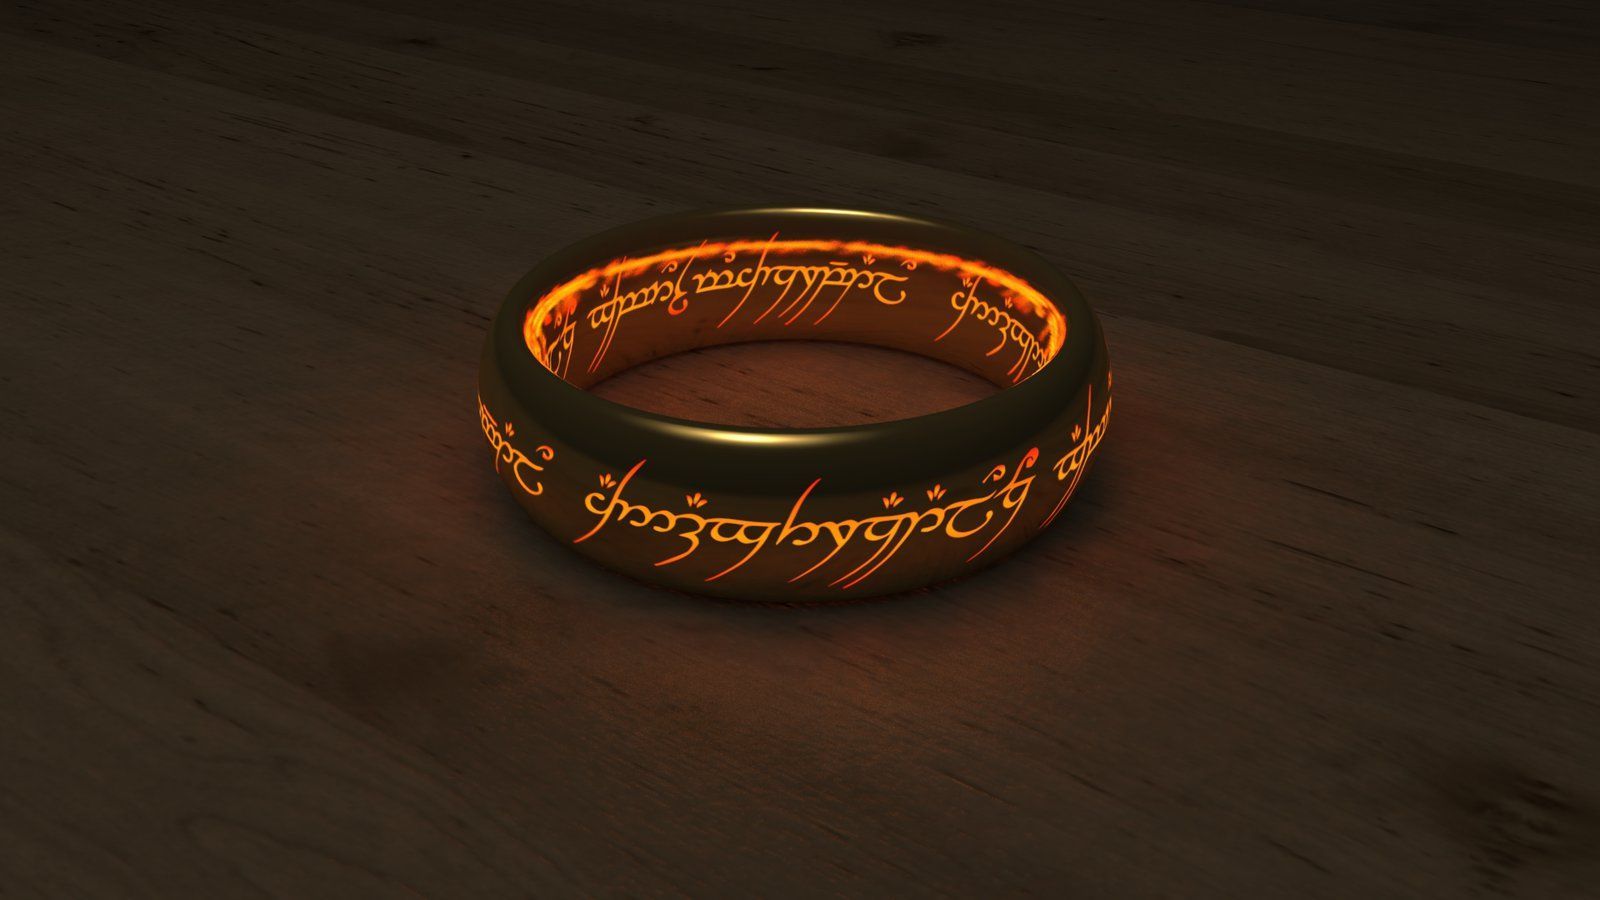 Pin By Roxann Dawson On LORD OF THE RINGS Hobbit. One Ring, Lord Of The Rings, Rings